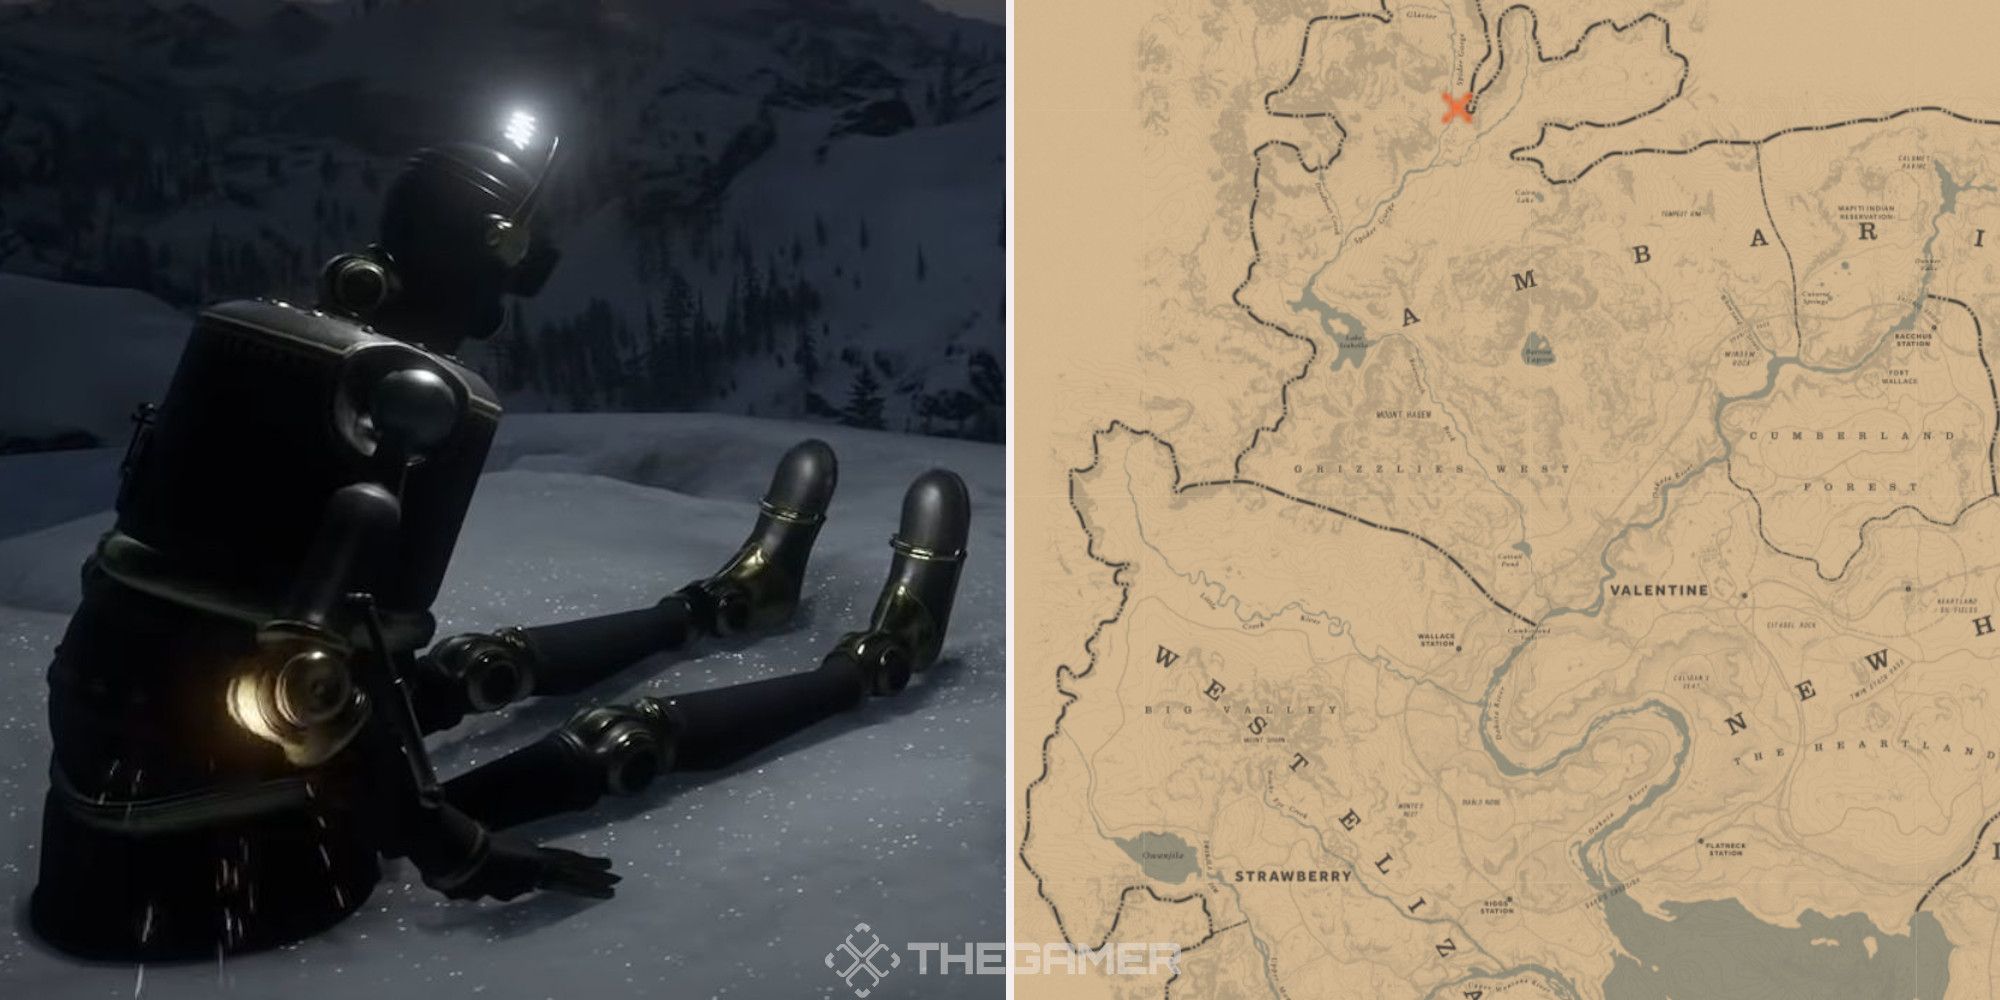 The automaton from Red Dead Redemption 2 sitting in the snow, next to an image of where it can be found marked on the map.